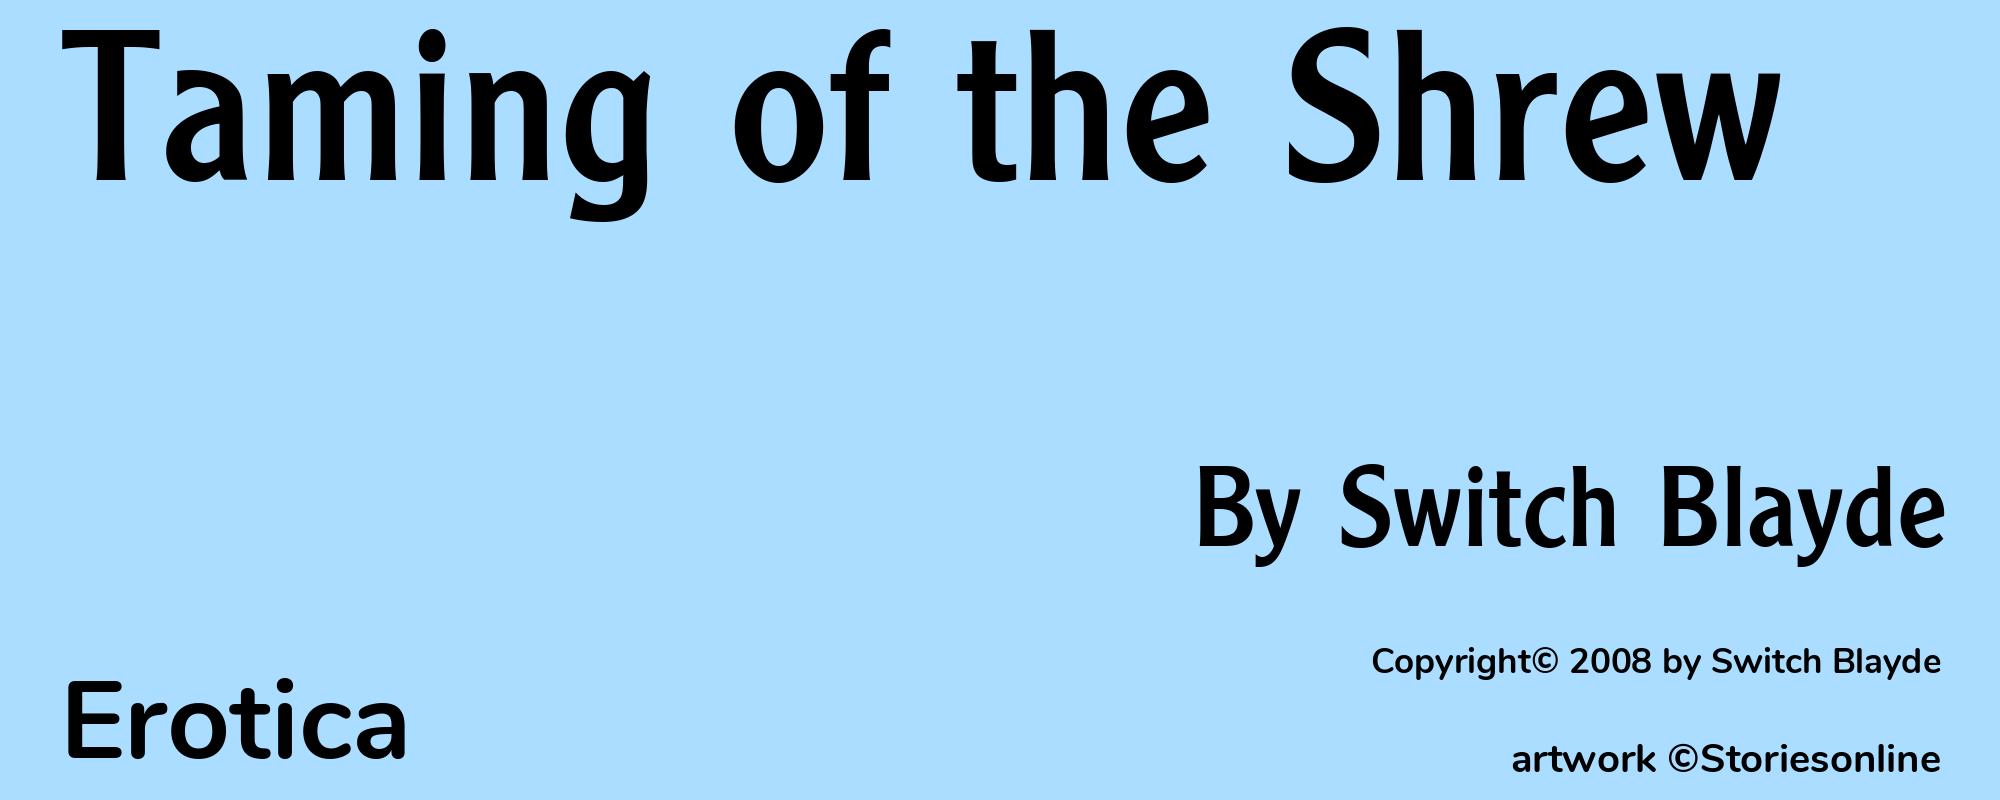 Taming of the Shrew - Cover